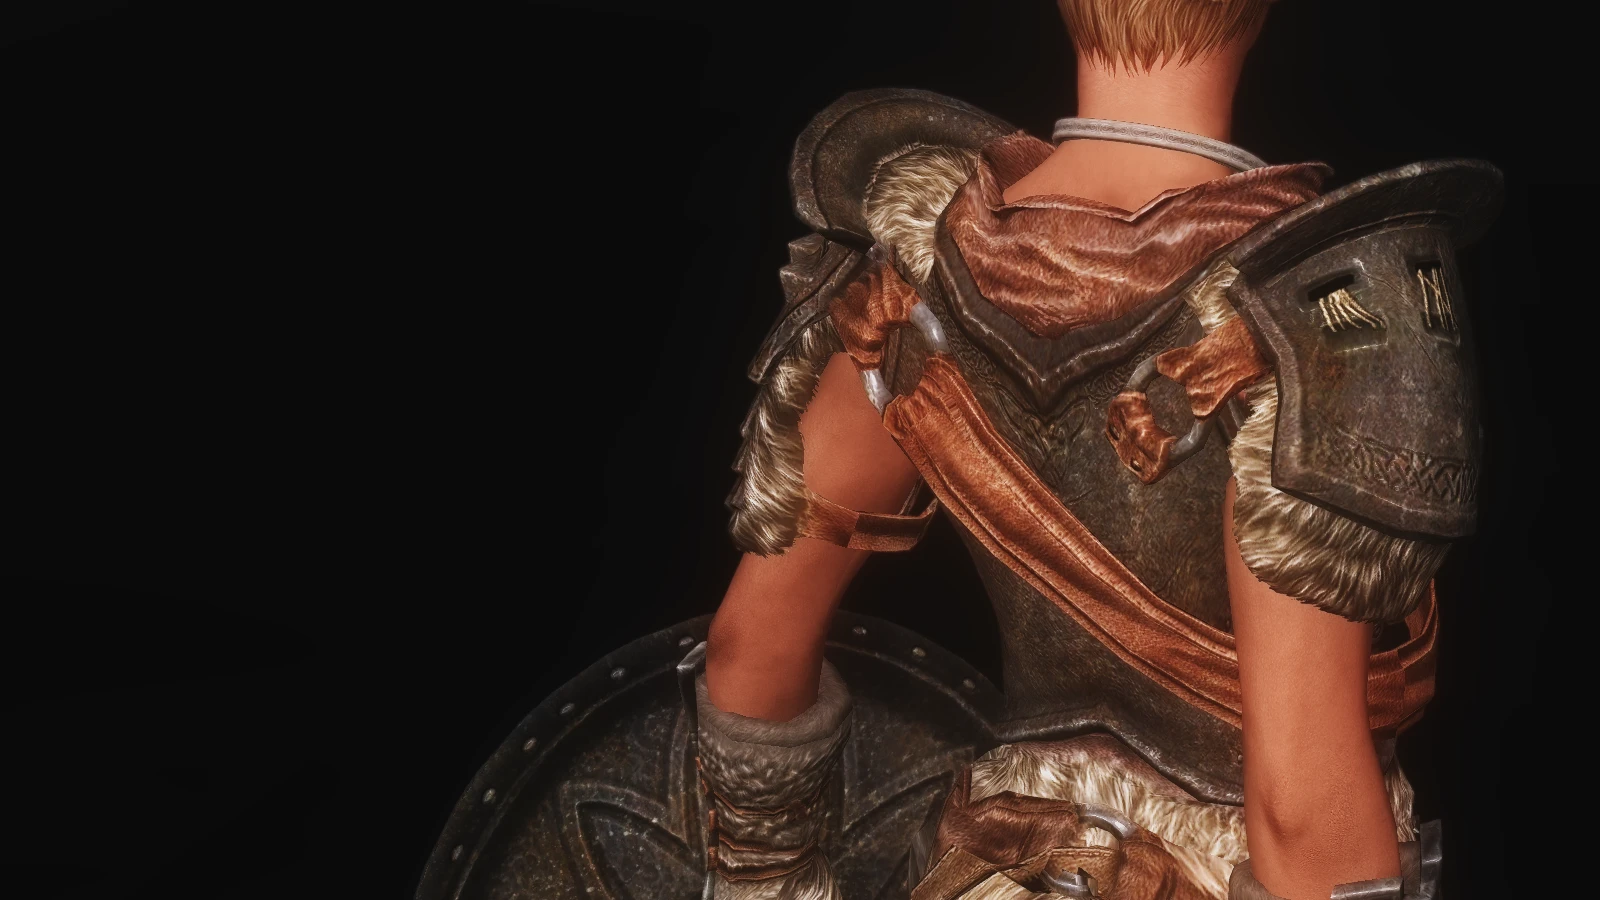 aMidianBorn Iron and Banded Armor at Skyrim Nexus - Mods and Community Band...